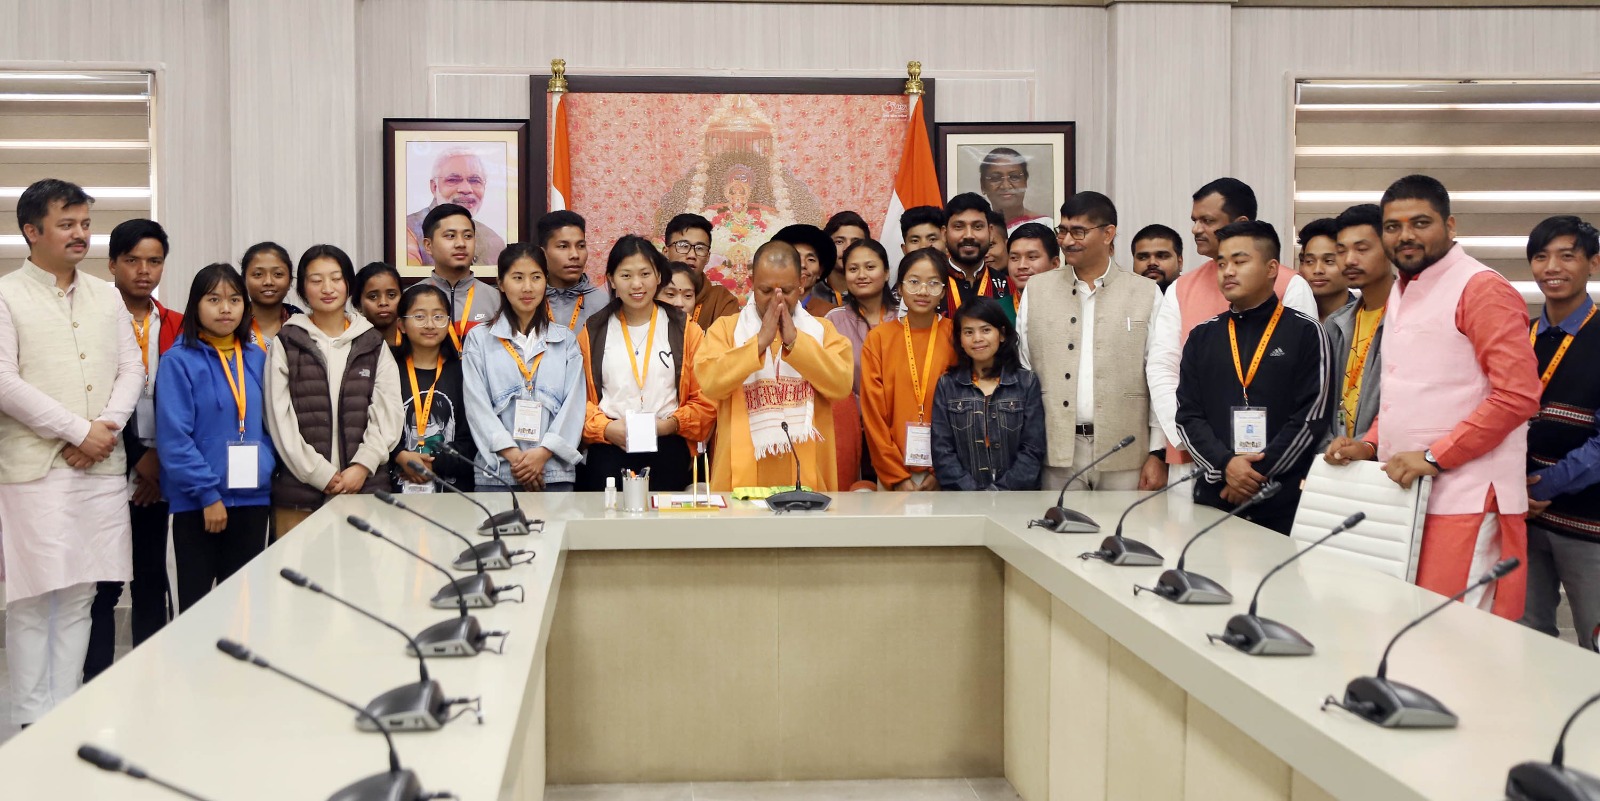 Uttar Pradesh Chief Minister Yogi Adityanath with students from NE at his residence in Lucknow on Wednesday